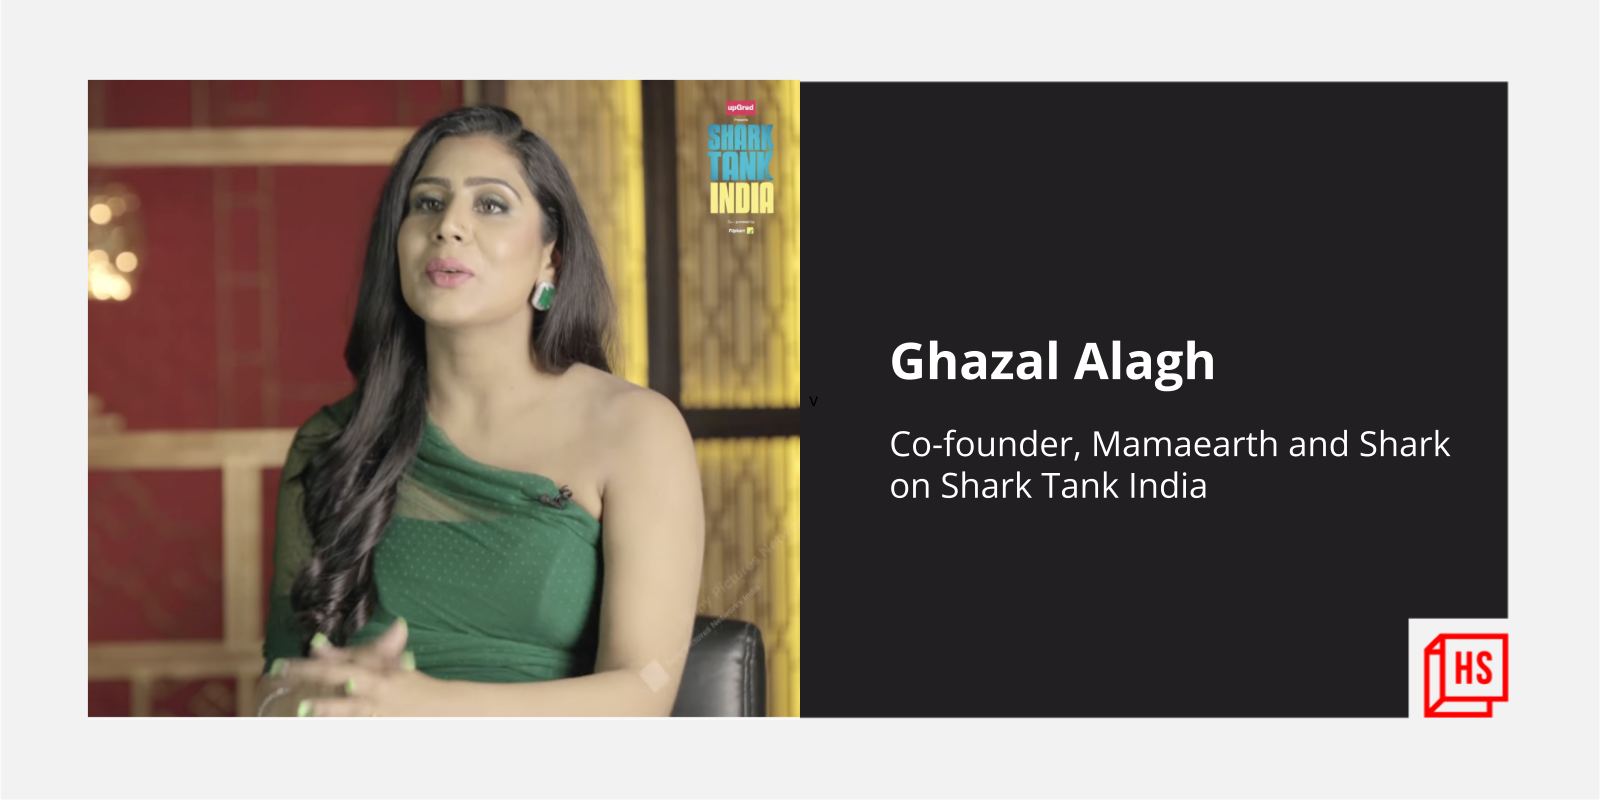 I enjoyed being myself and talking to entrepreneurs on Shark Tank India, says Ghazal Alagh of Mamaearth